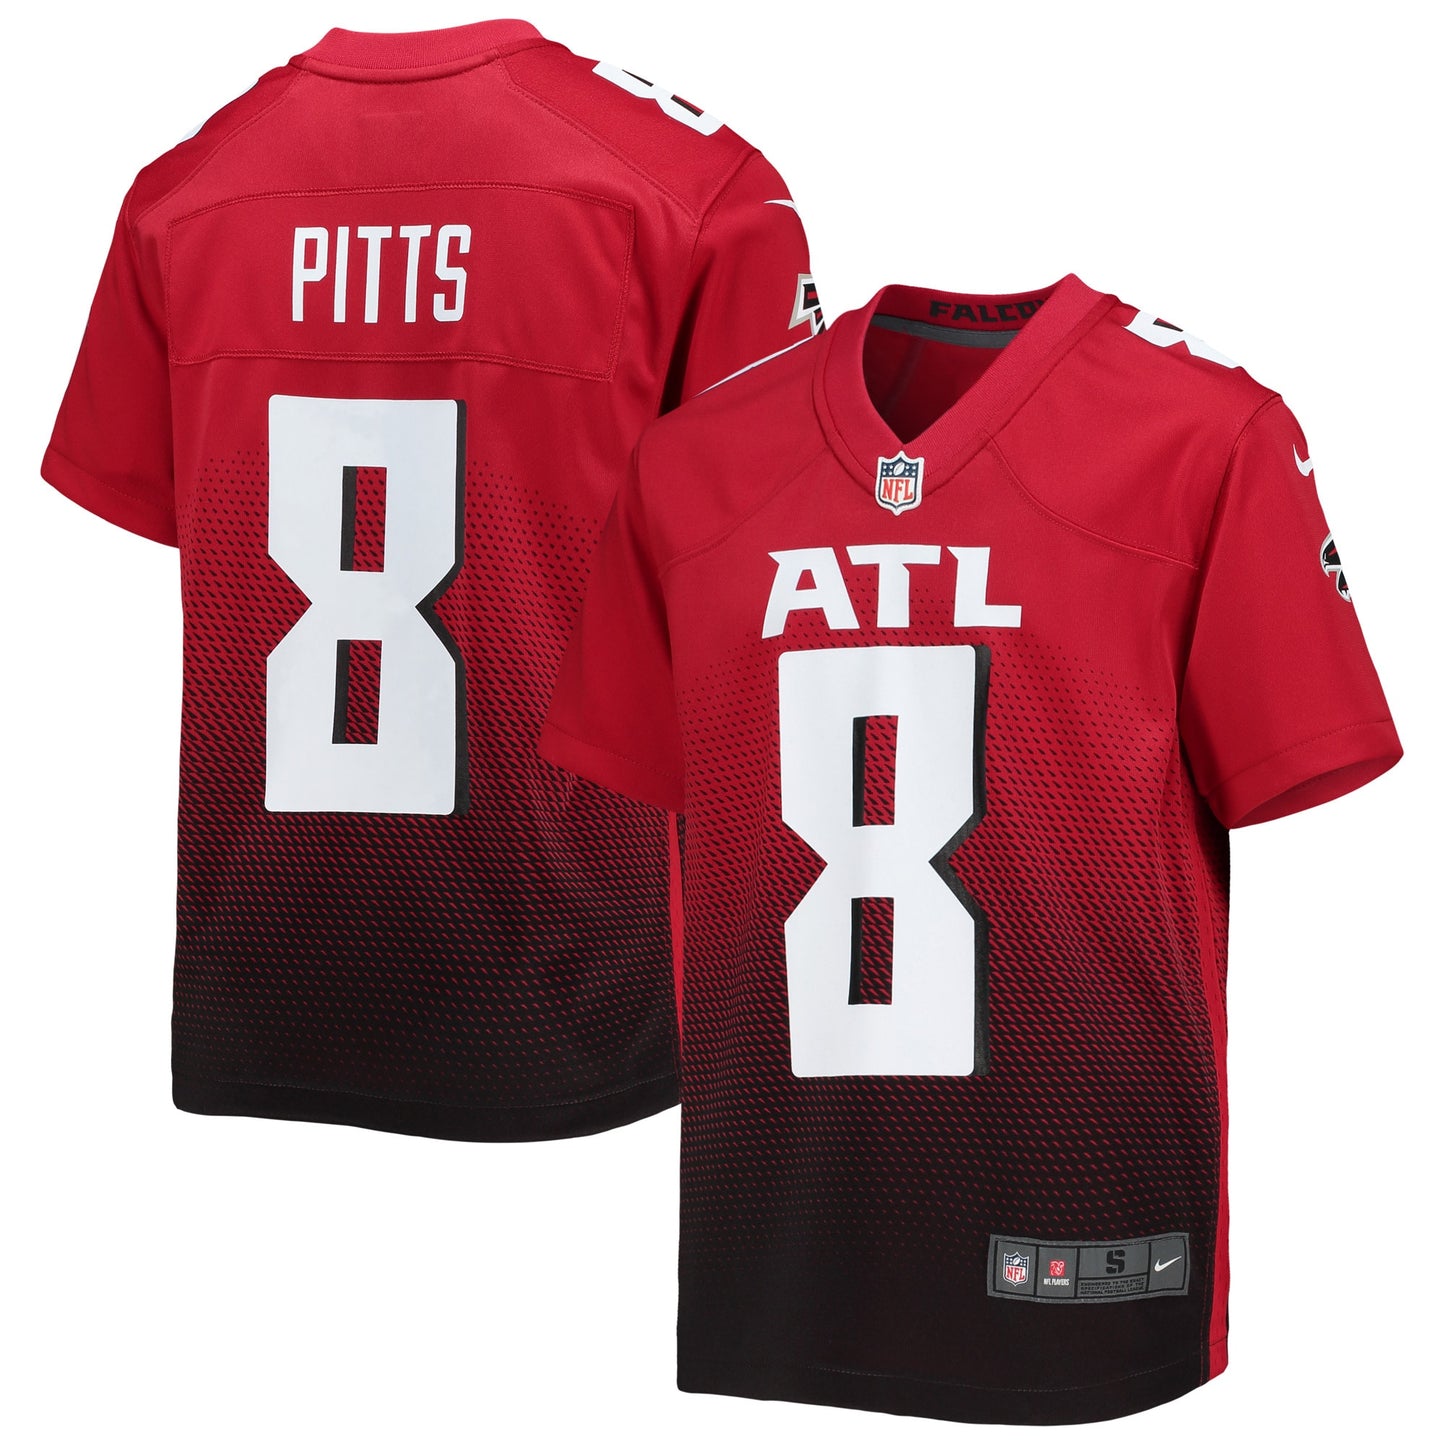 Kyle Pitts Atlanta Falcons Nike Youth Game Jersey - Red